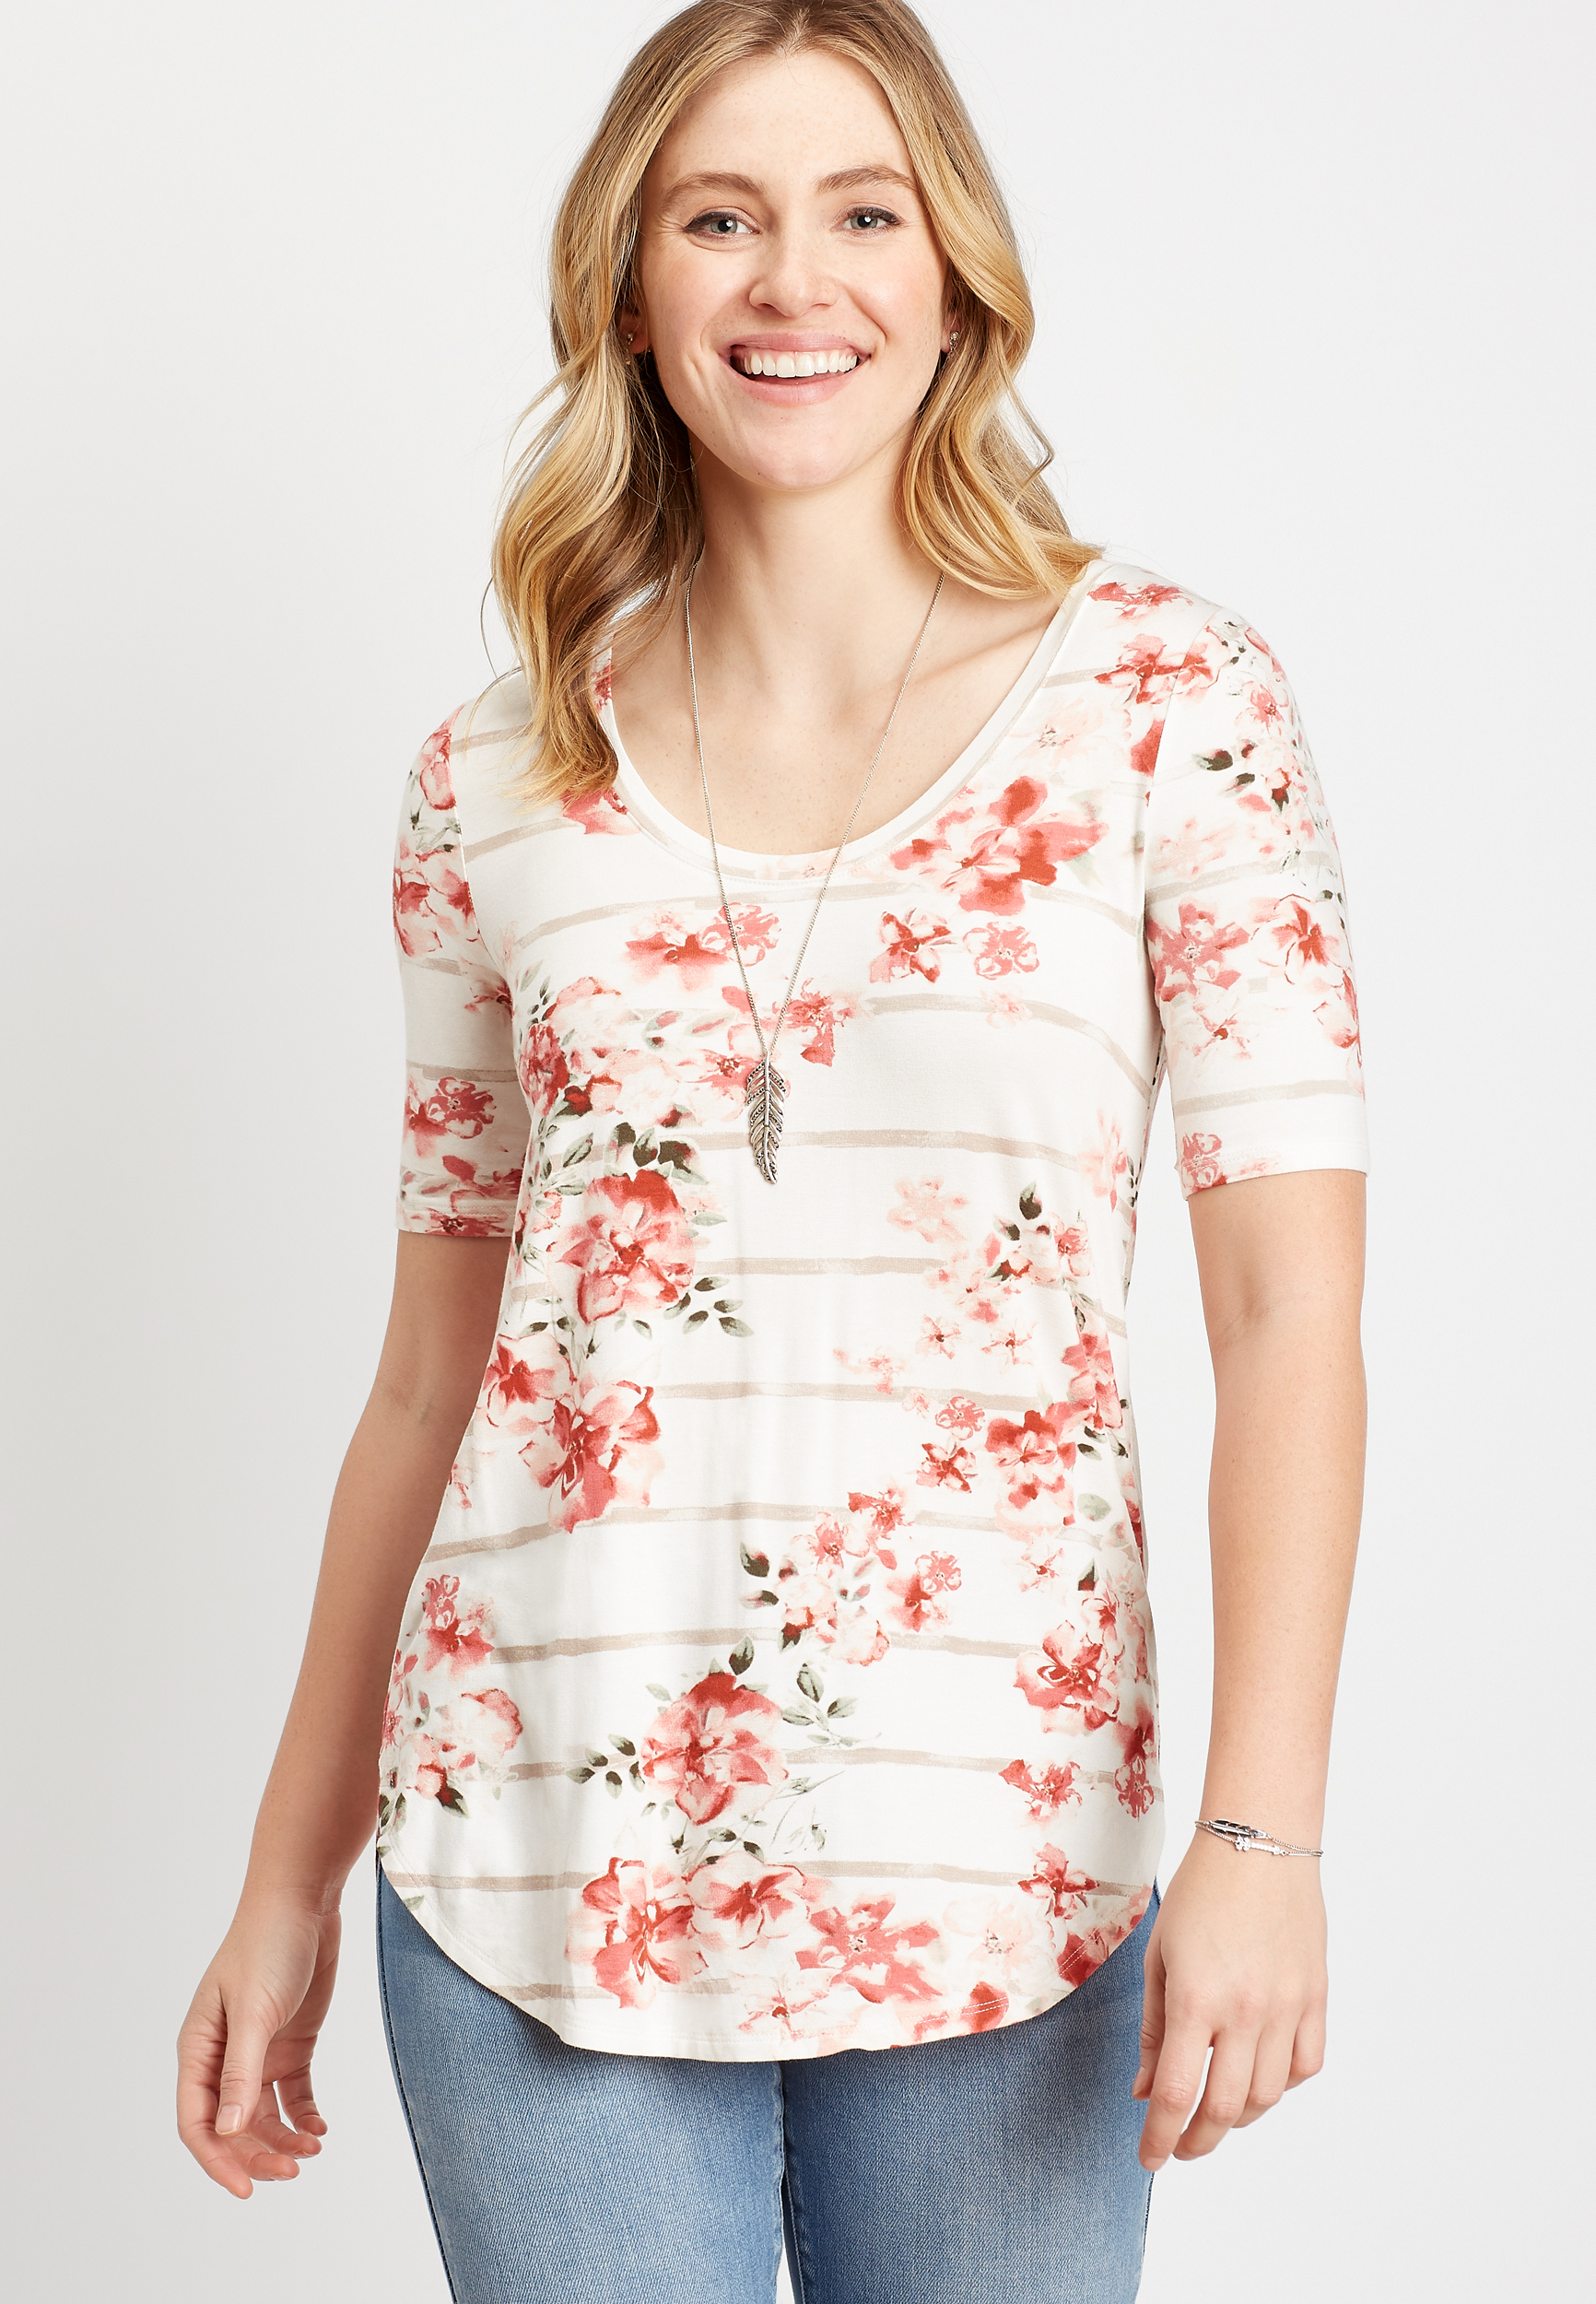 24/7 Pink Floral Striped Flawless Tee | maurices